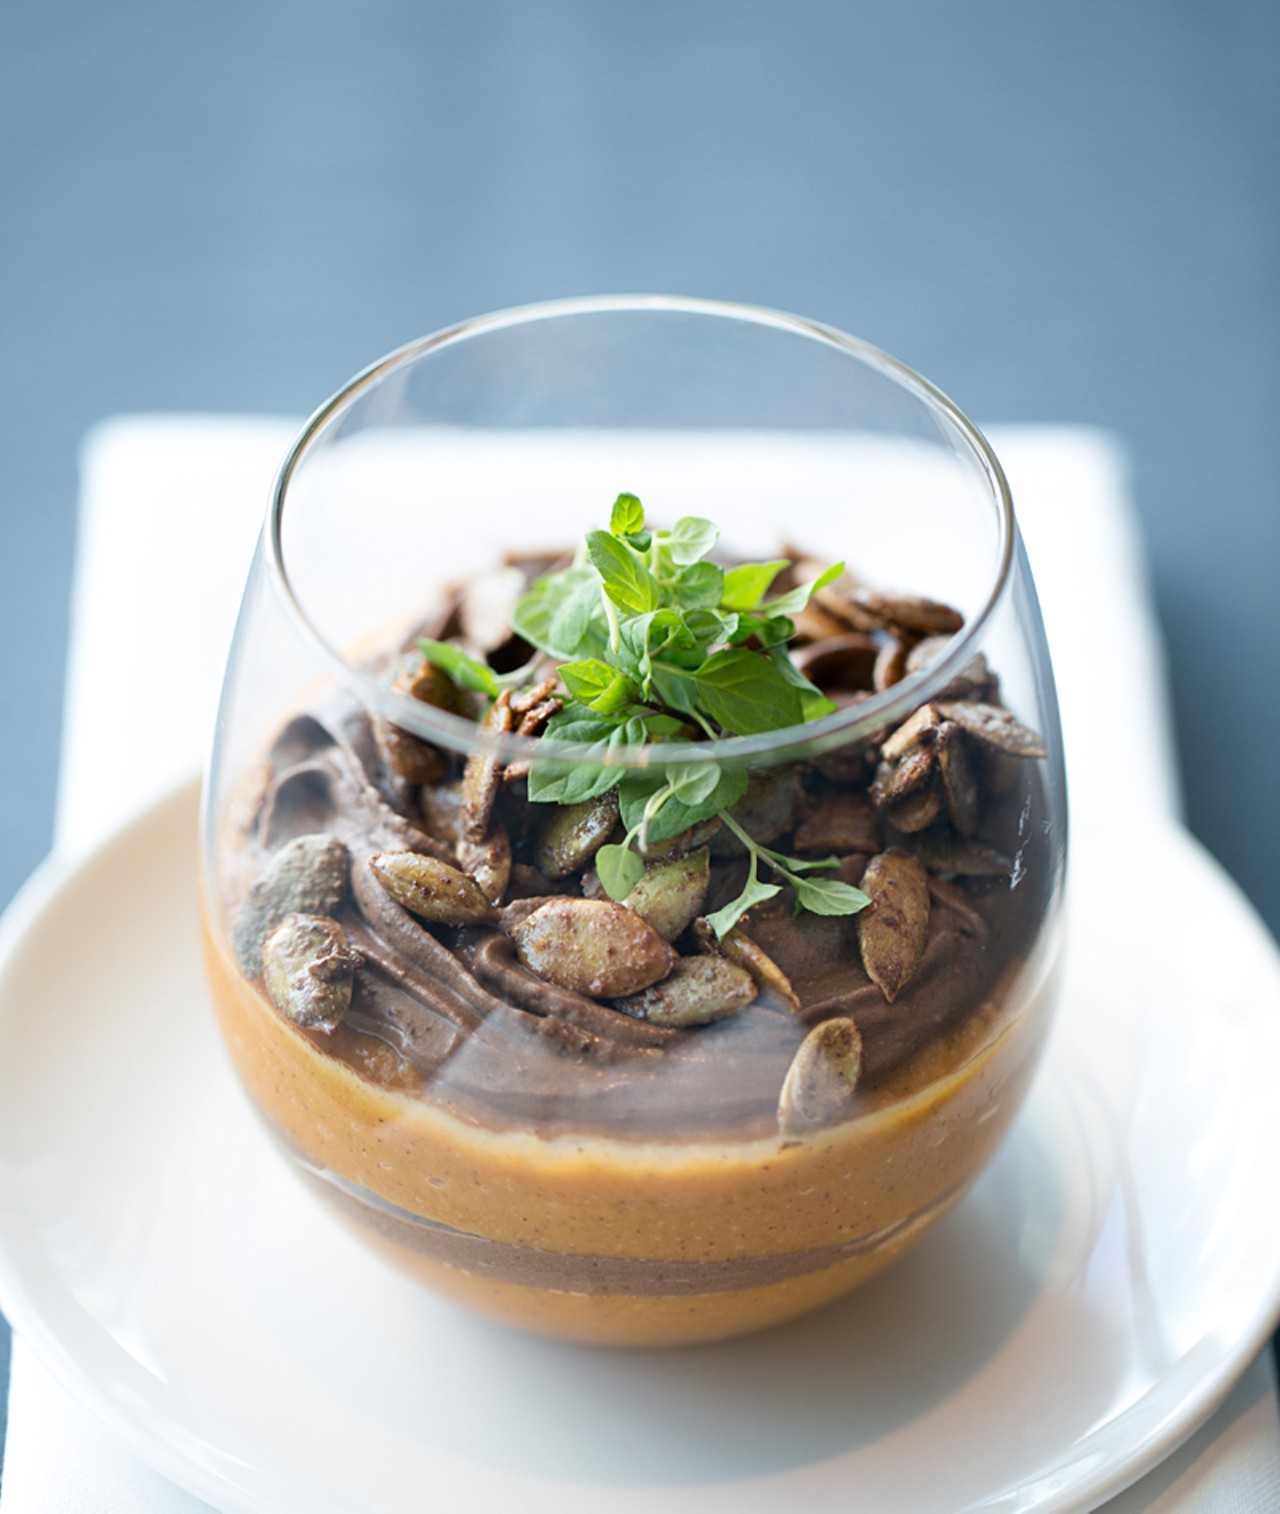 "A Mosaic of Sweet Potato Pudding" features chocolate-orange mousse, maple candied pumpkin seeds.